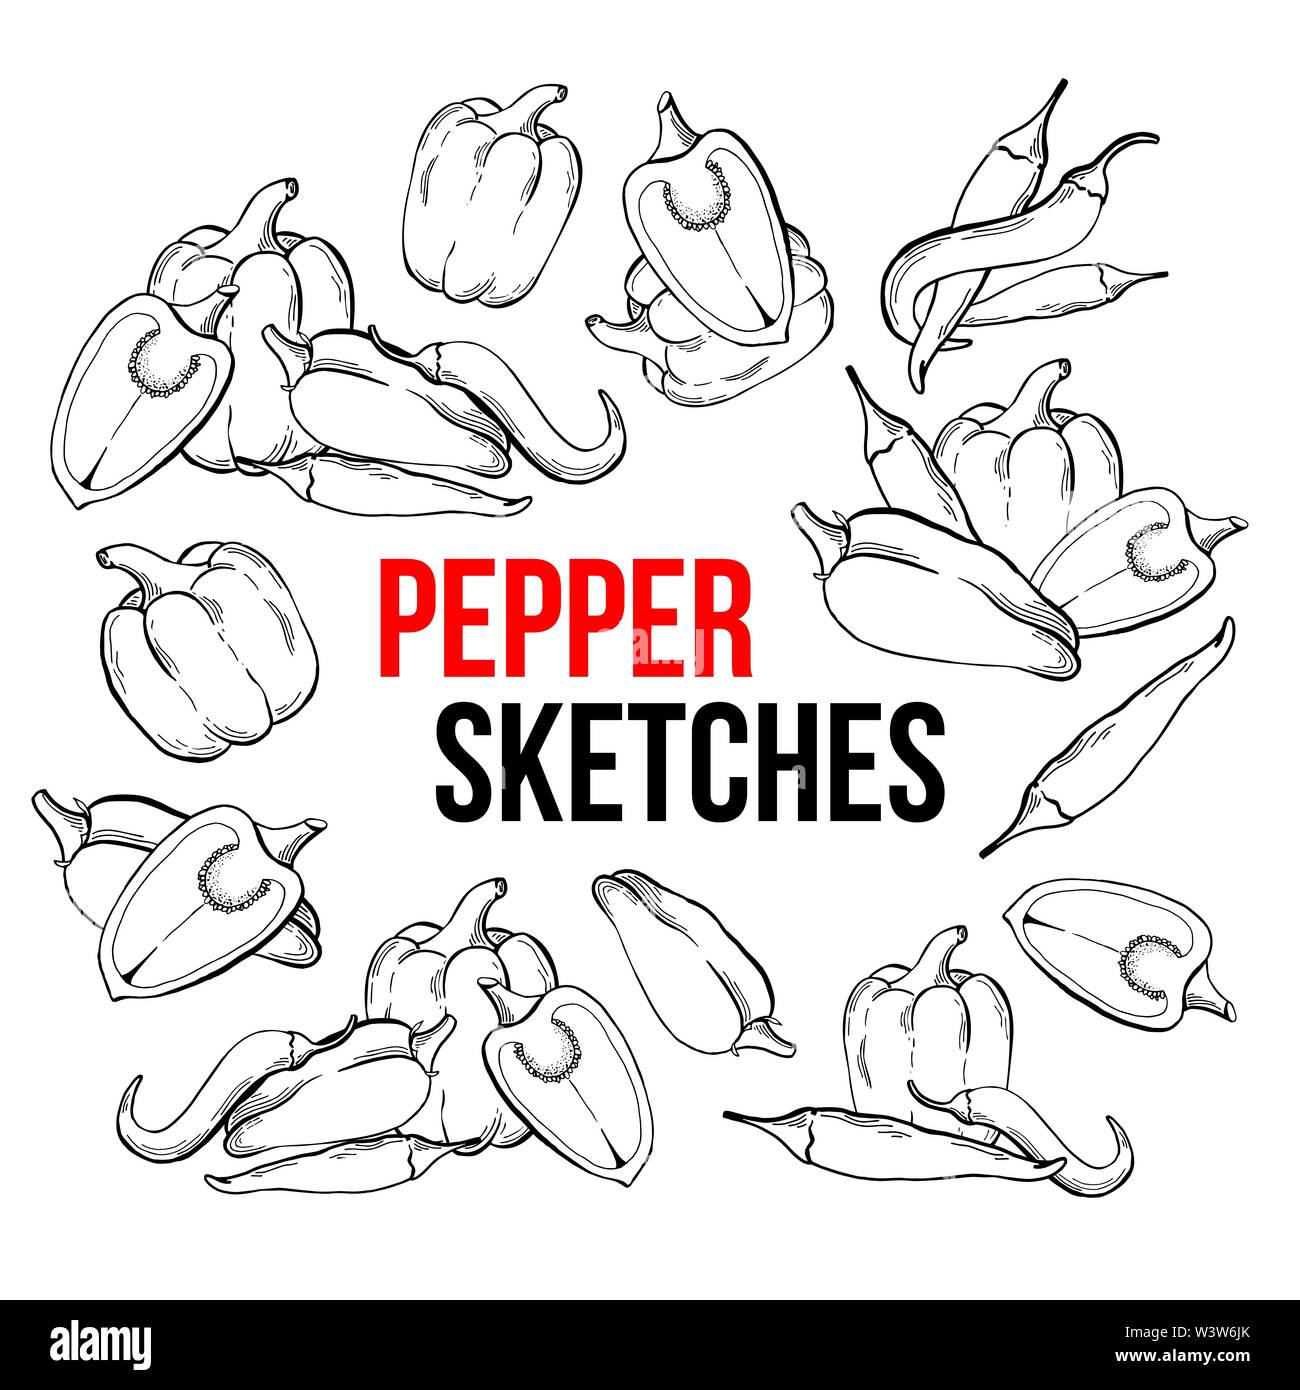 Peppers vegetarian food, vegetable handdrawn sketch isolated on white background. Different kinds of peppers, chili, jalapeno, cayenne, bell sweet. Engraved illustration of food ingredient. Vector set Stock Vector